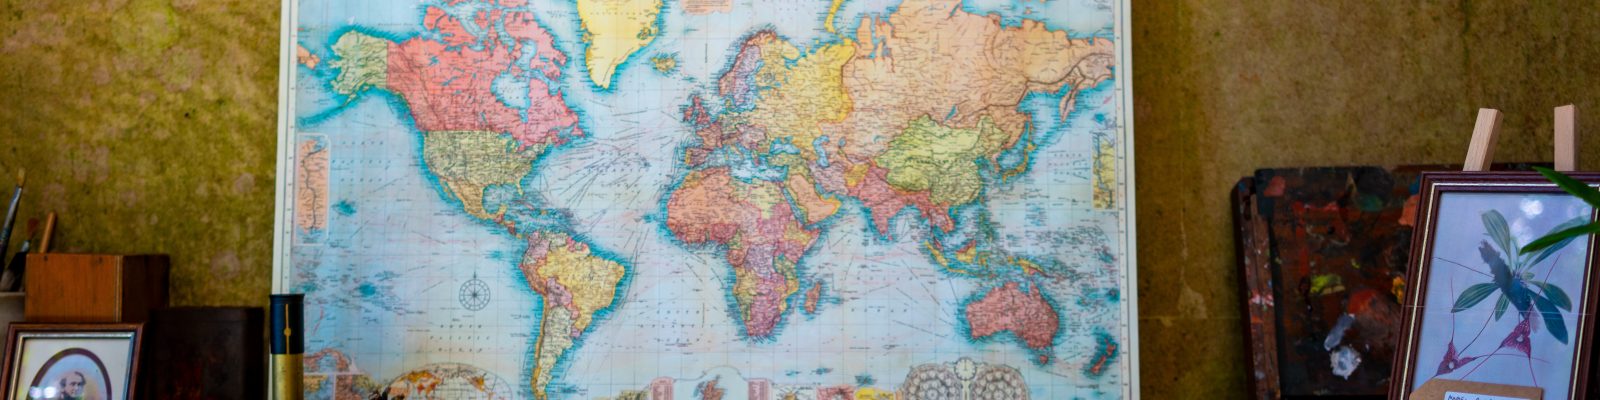 Map of the world sitting at the back of a cluttered desk covered in books and art materials.